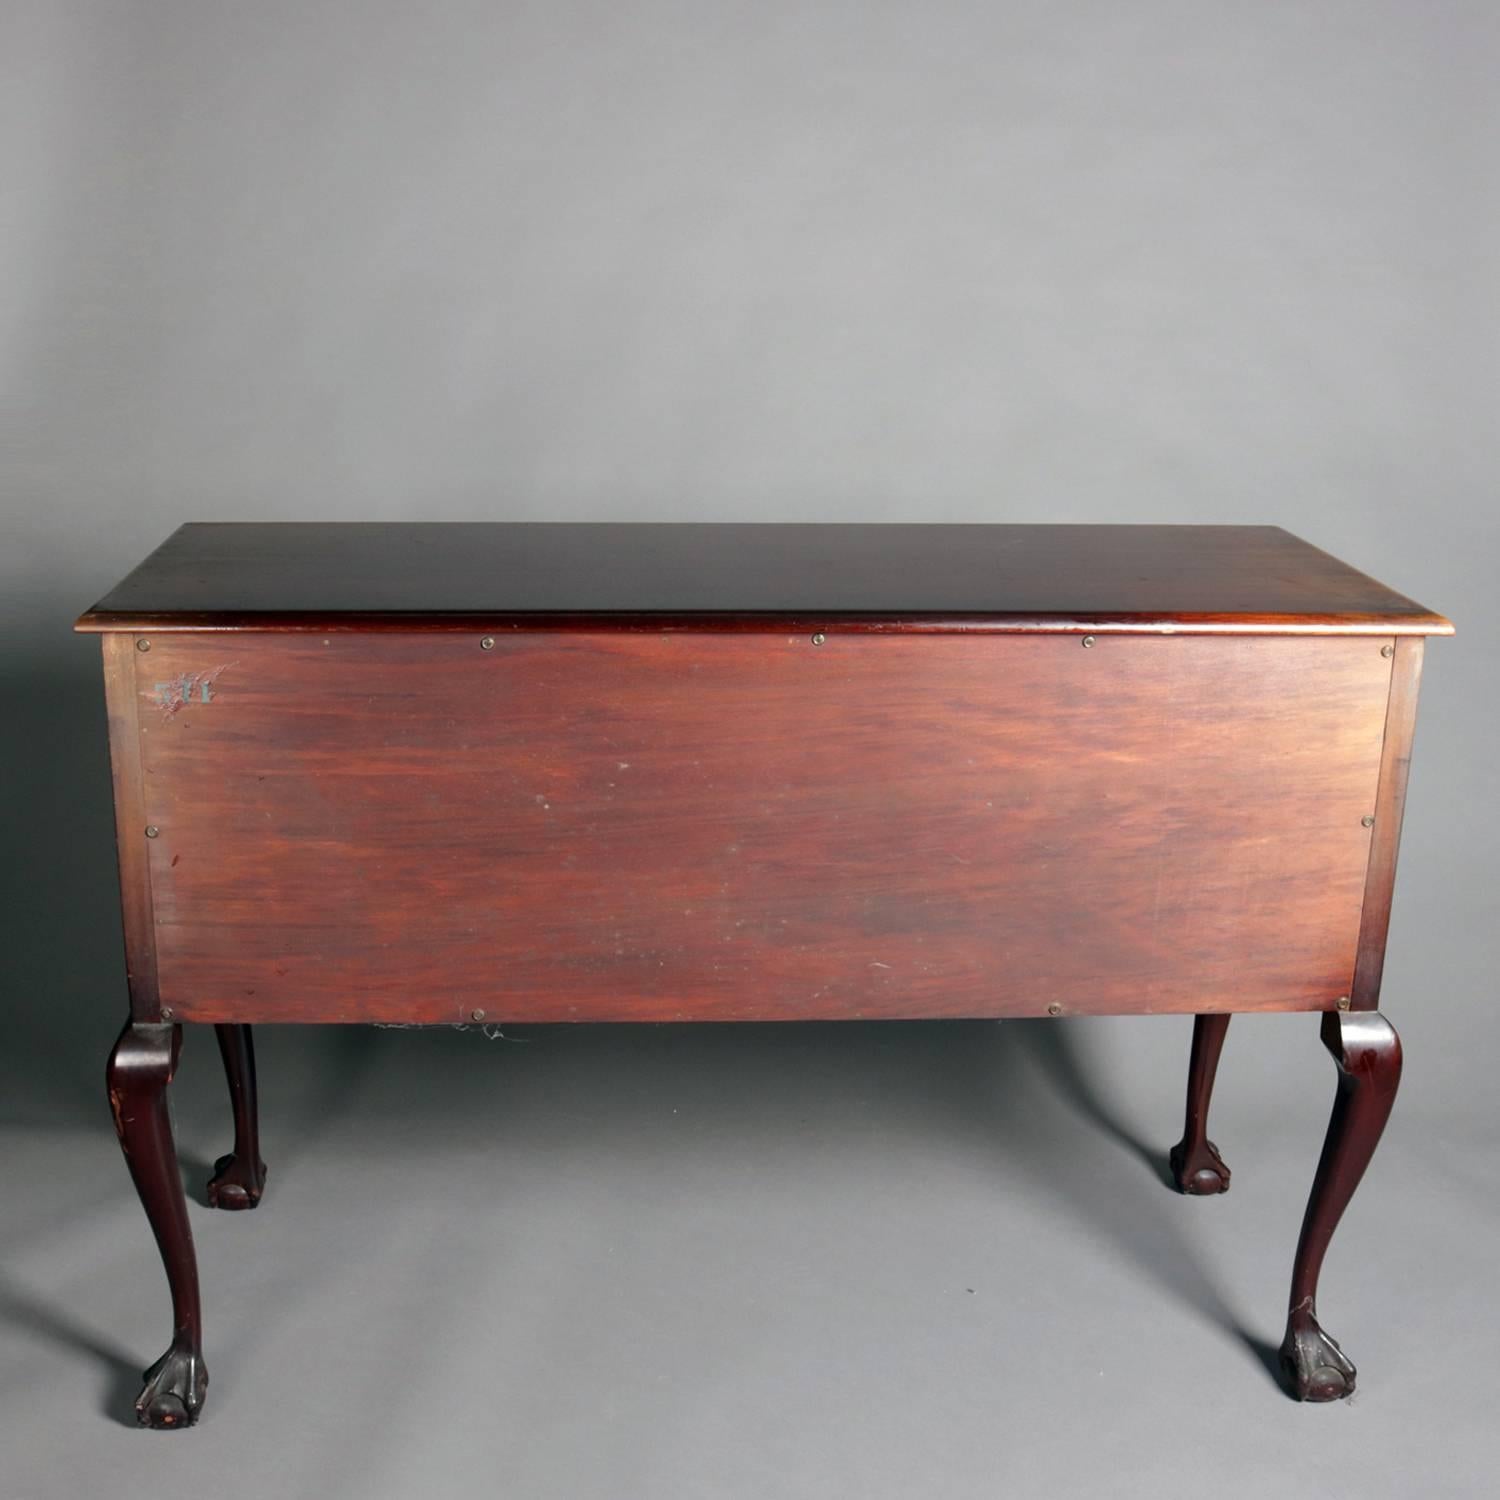 20th Century Chippendale Style Mahogany Four-Drawer Server by Kaplan Furniture